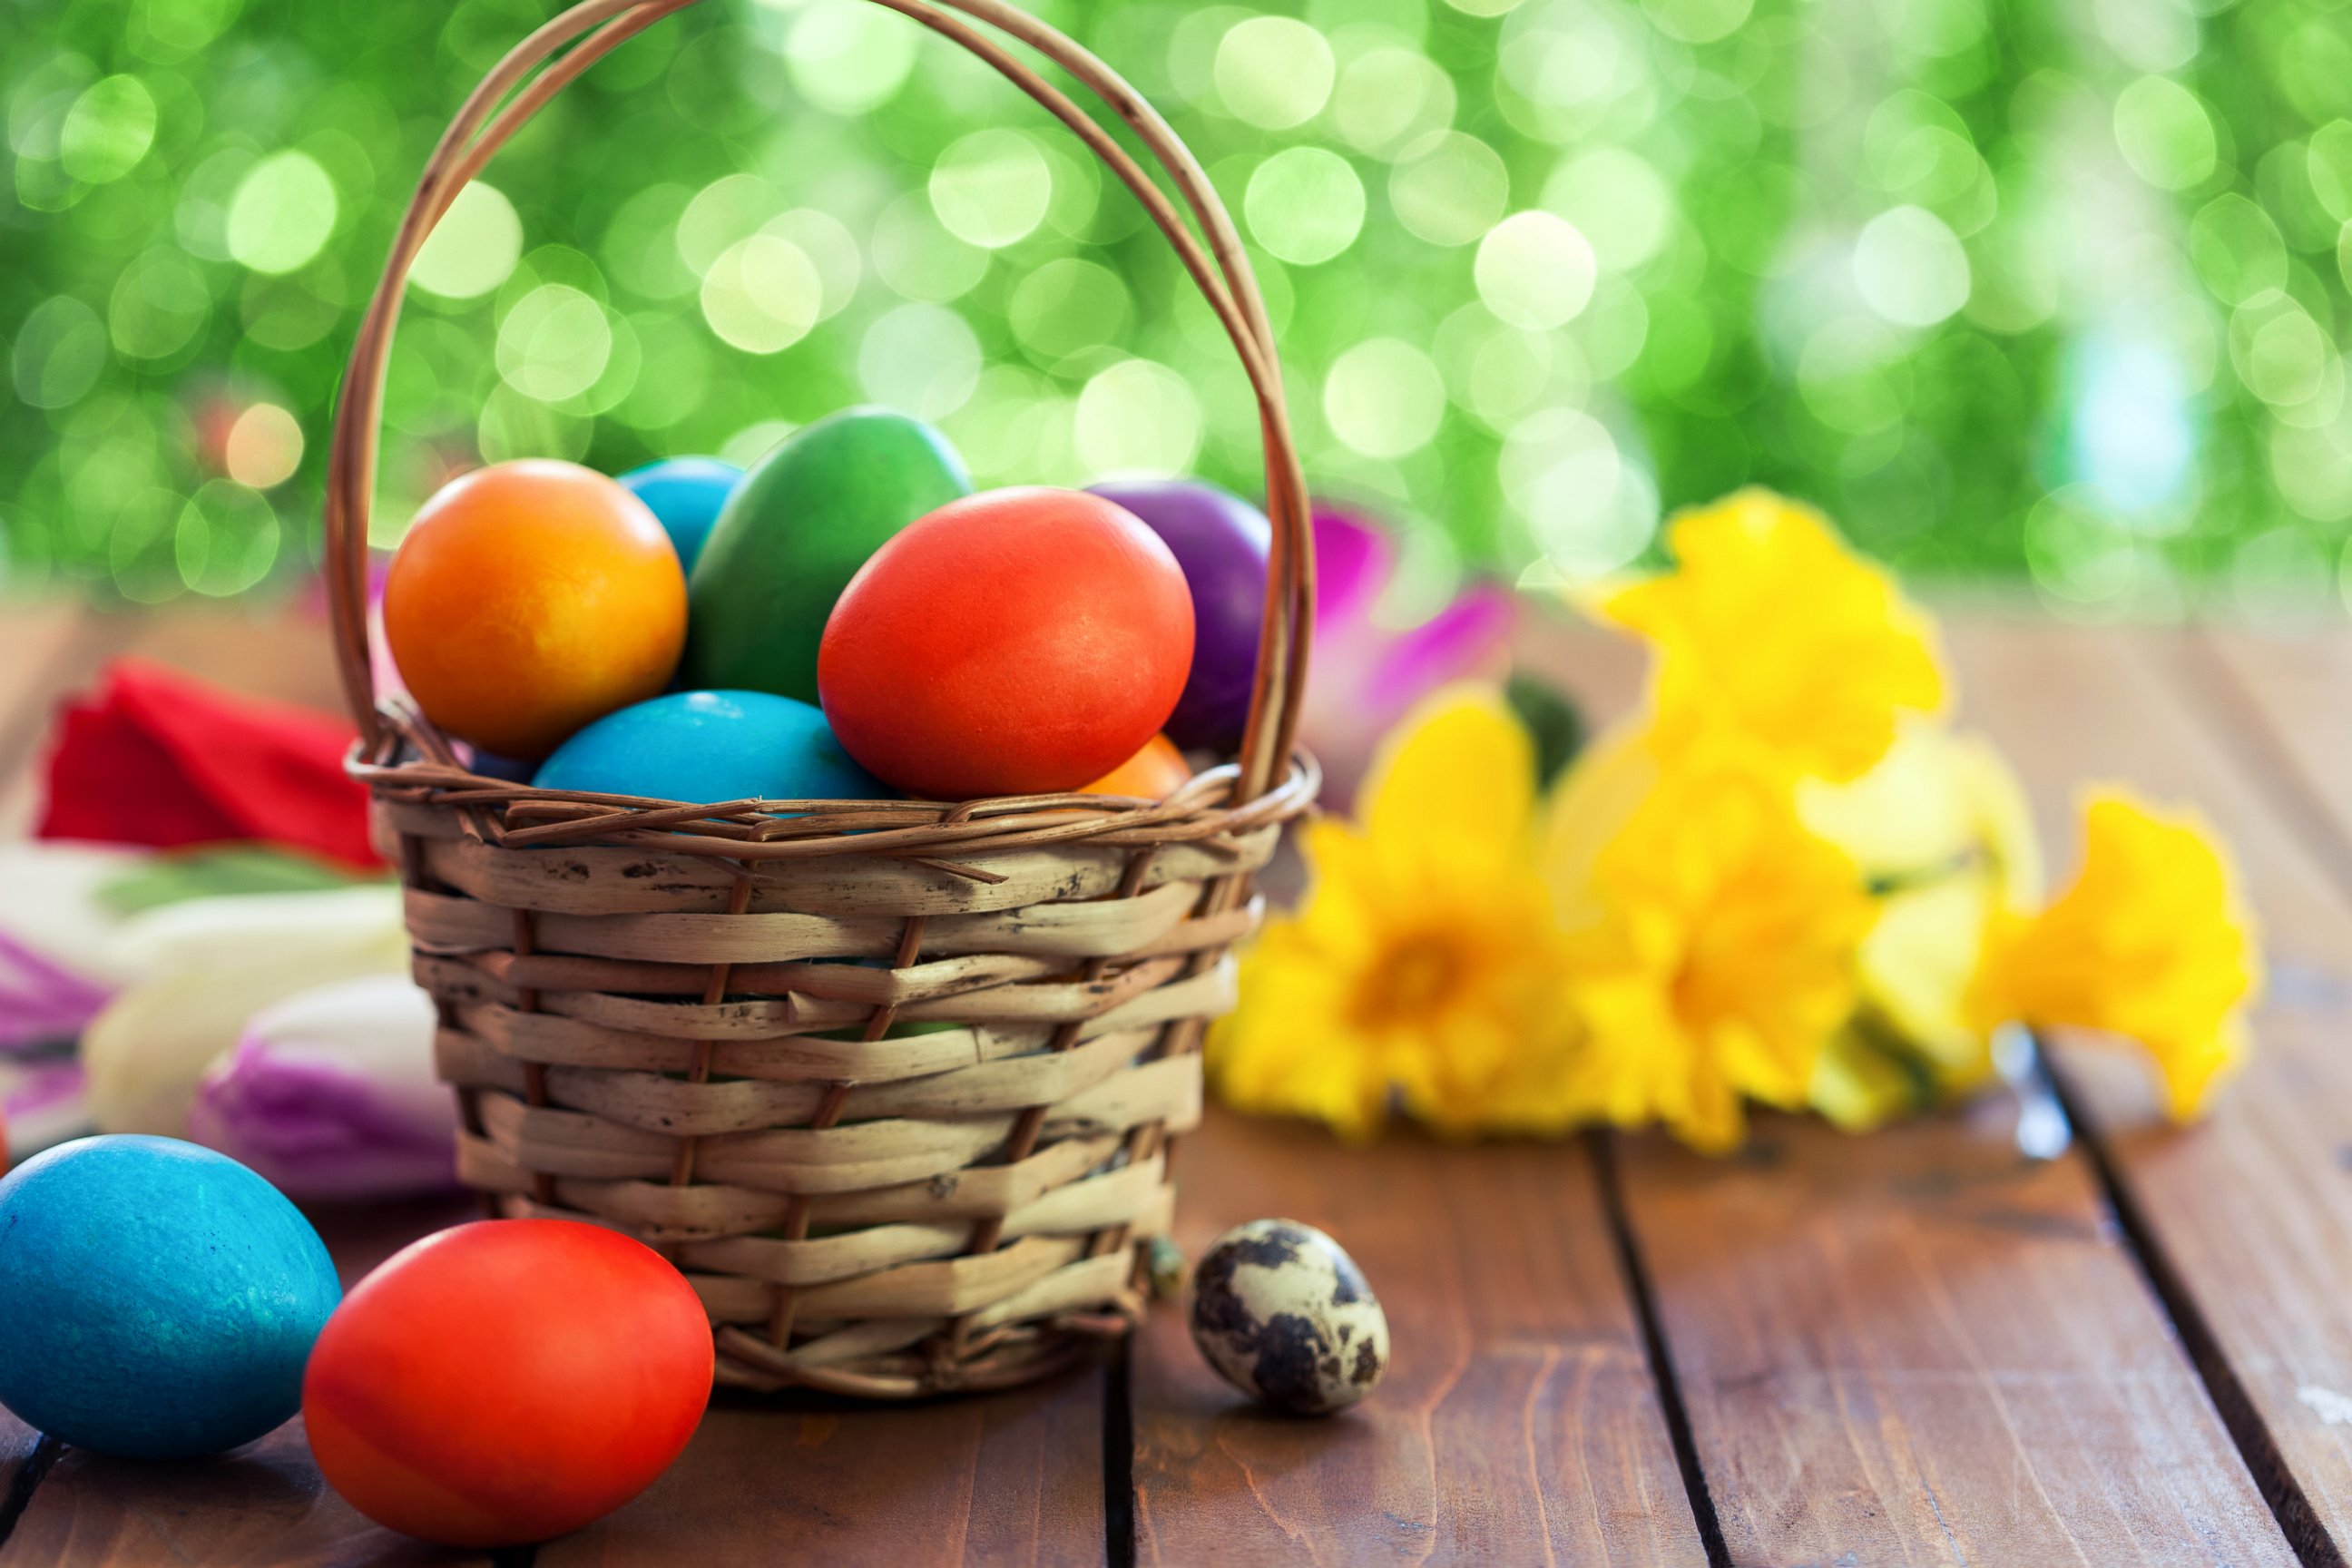 PHOTO: Basket of painted Easter eggs.